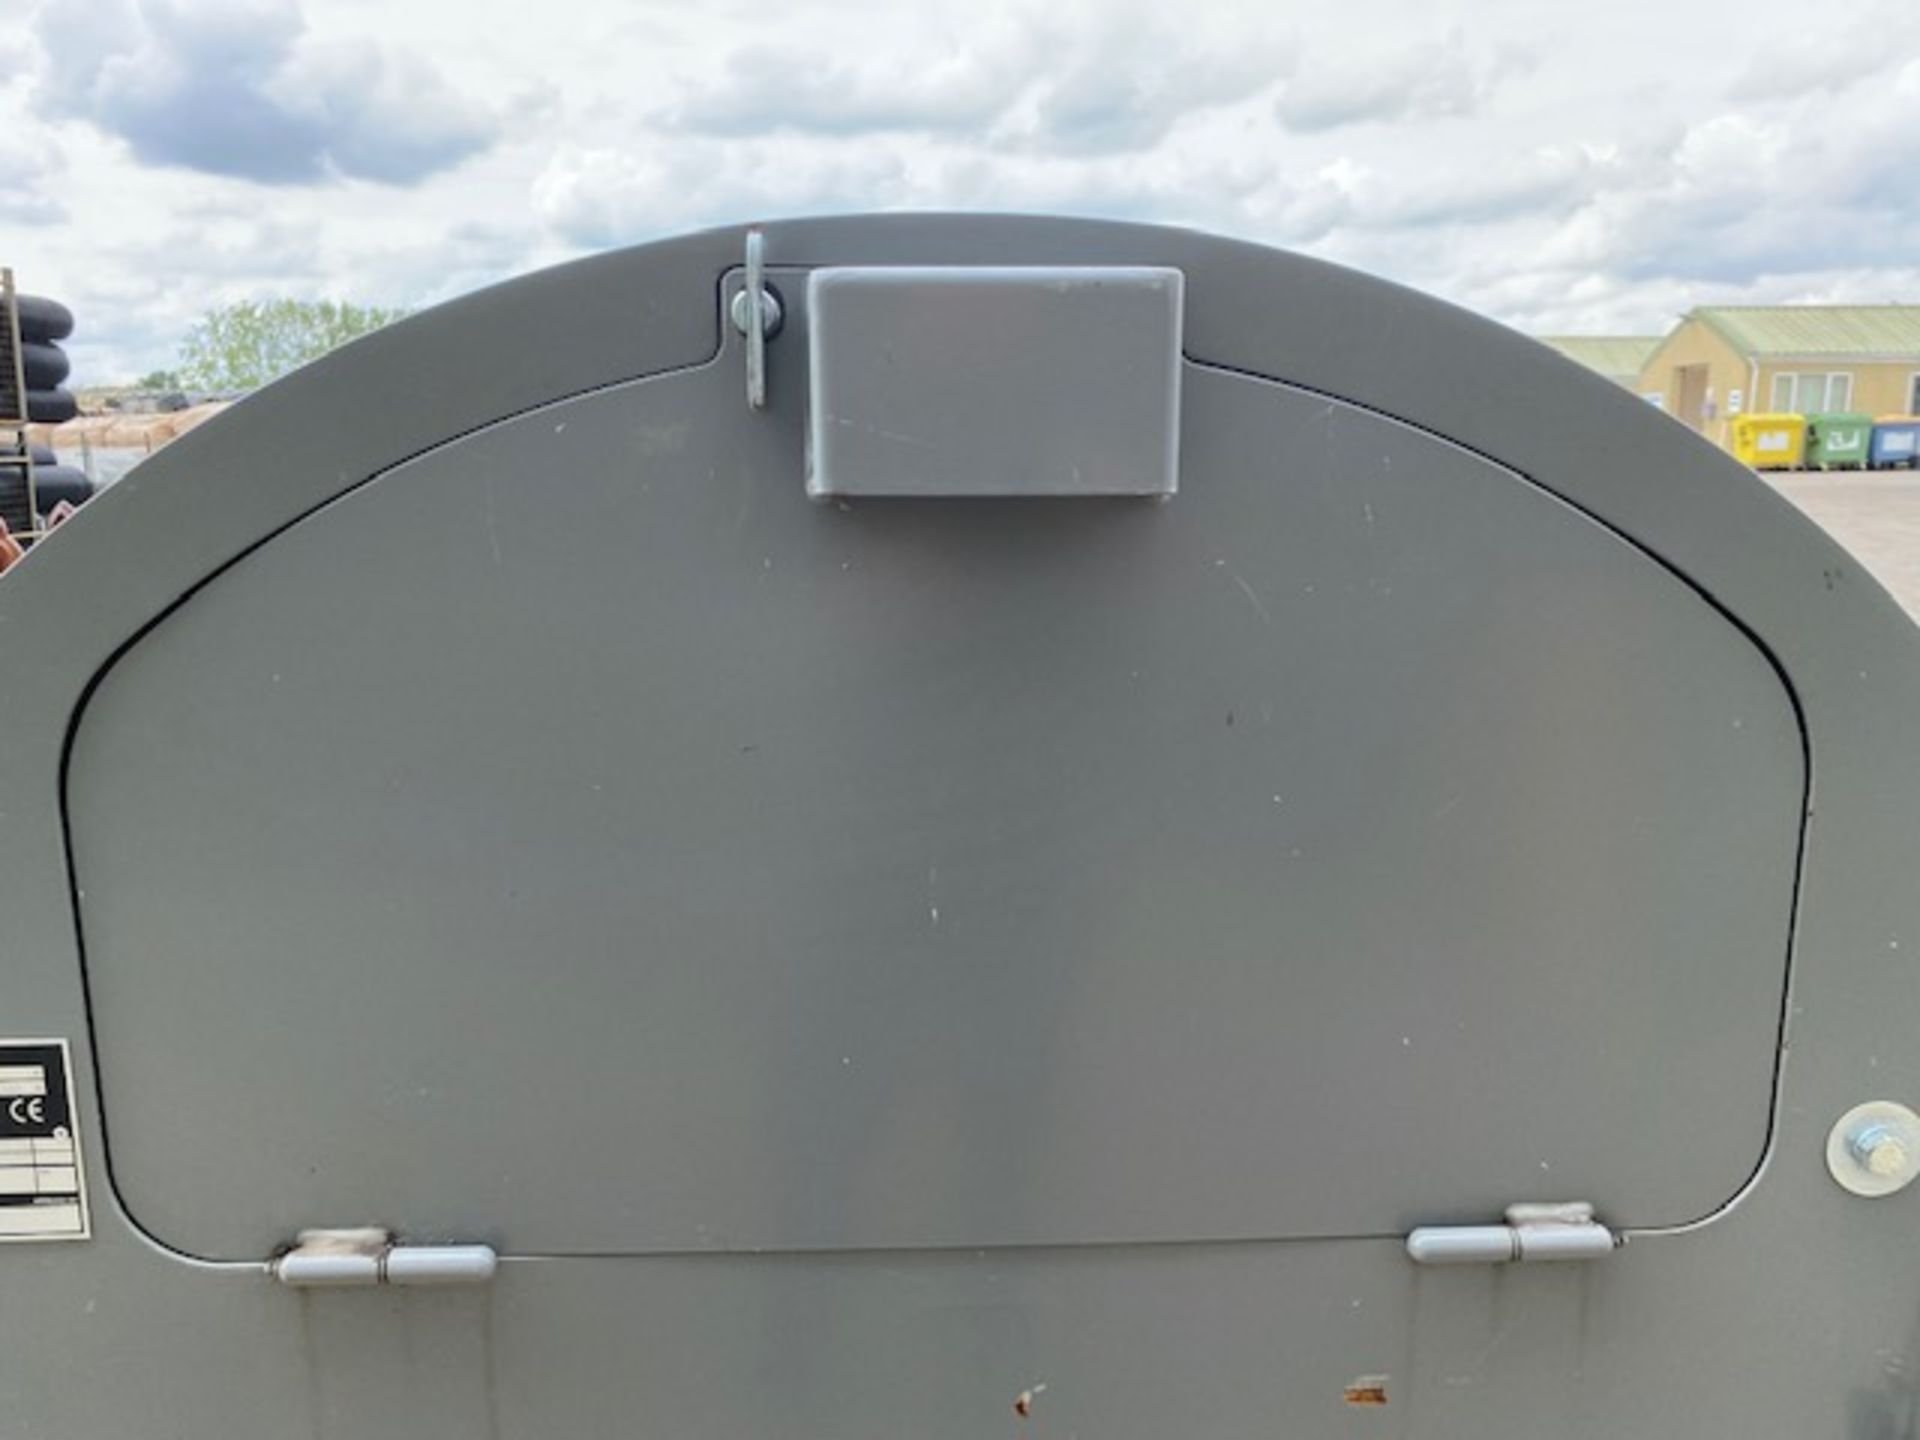 Fuelproof 1000 litre bunded Demountable fuel tank Hardly Used - Image 11 of 16